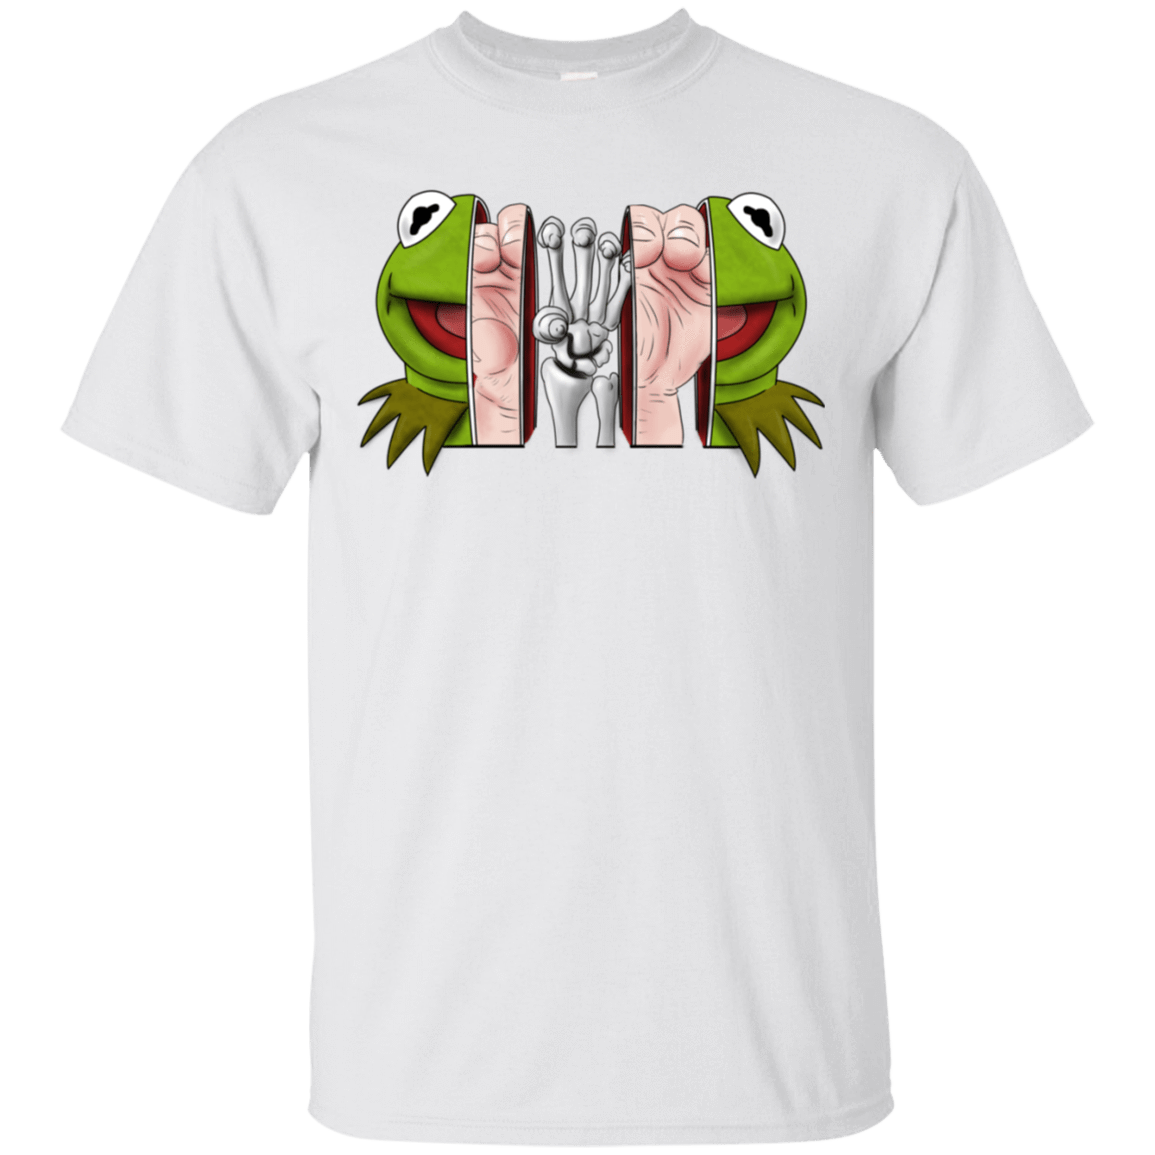 T-Shirts White / S Inside the Frog T-Shirt